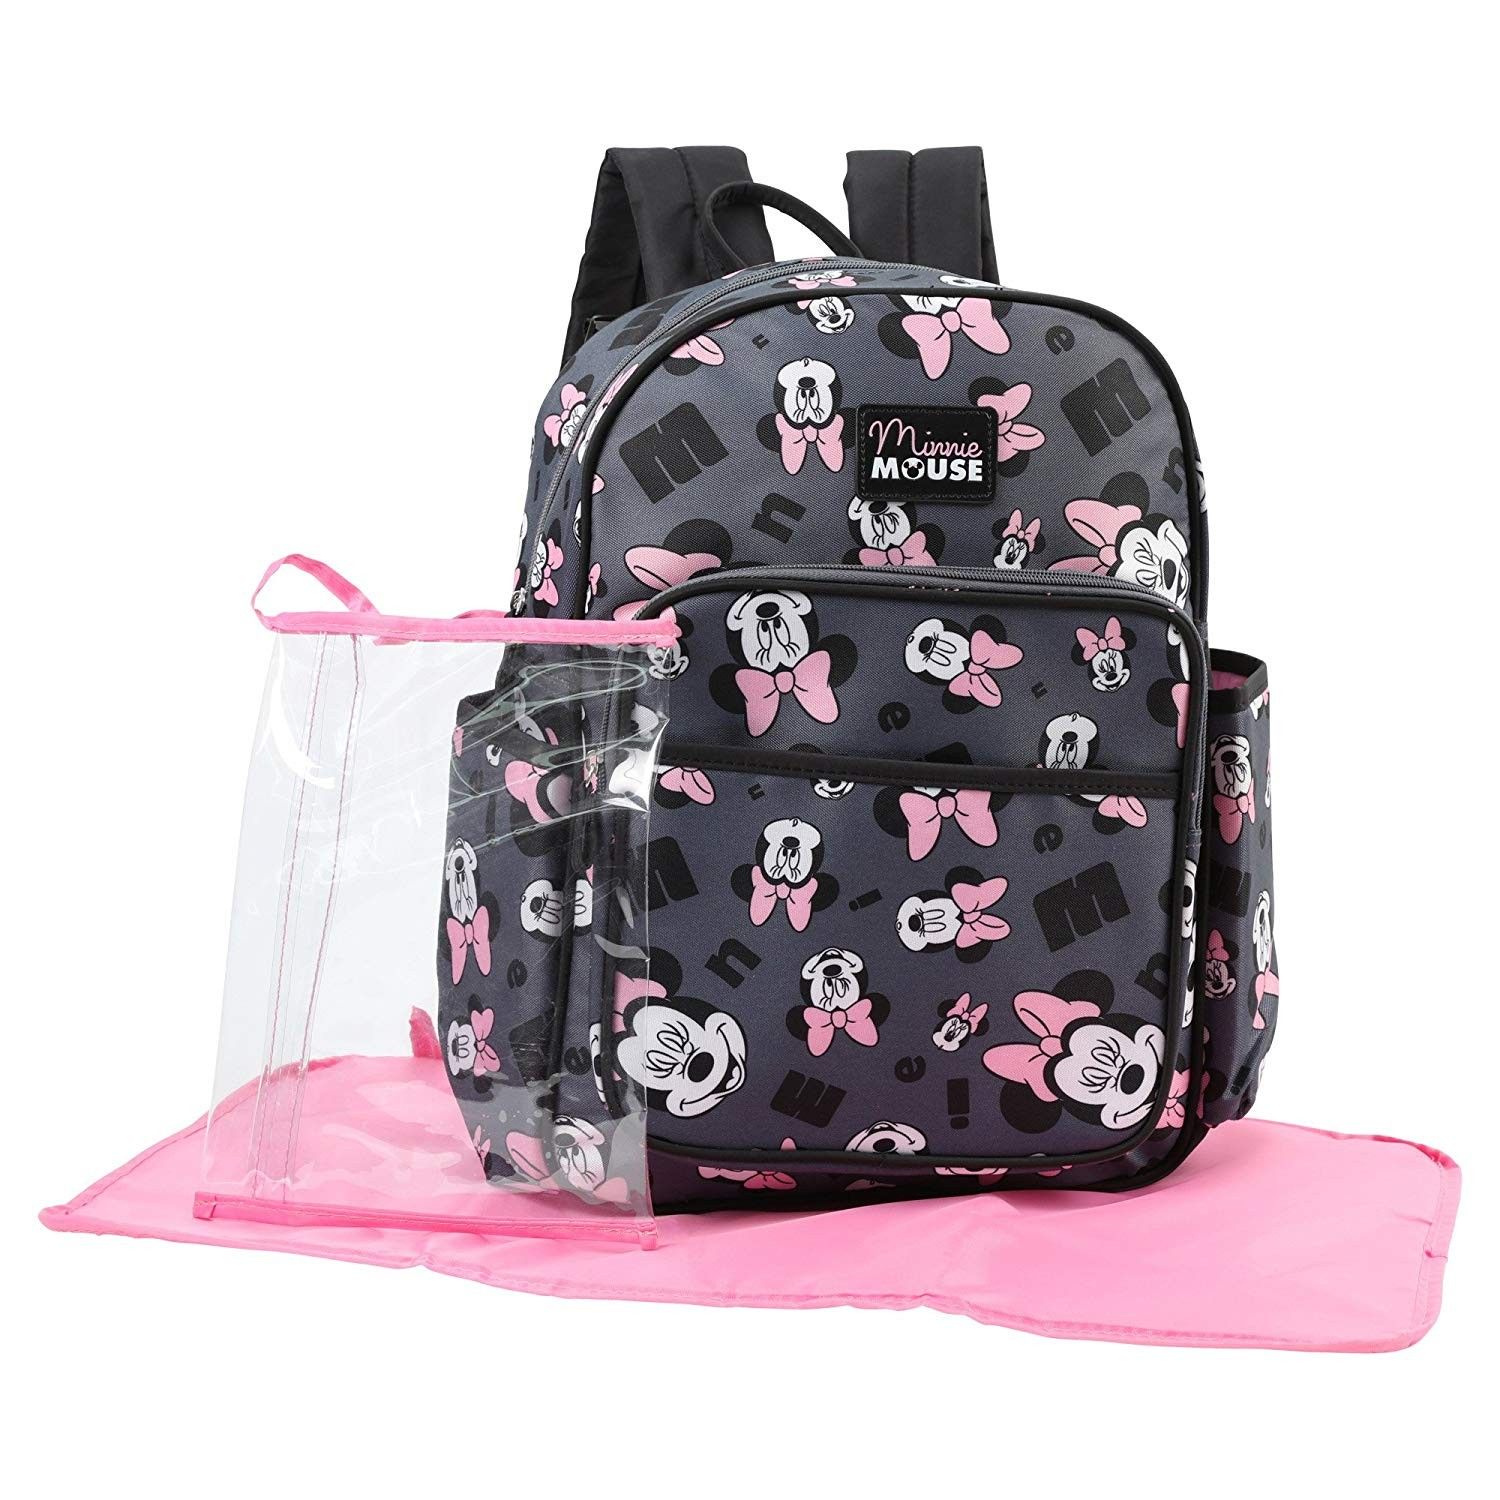 Minnie Mouse Design Diaper Backpack Bag By Disney New